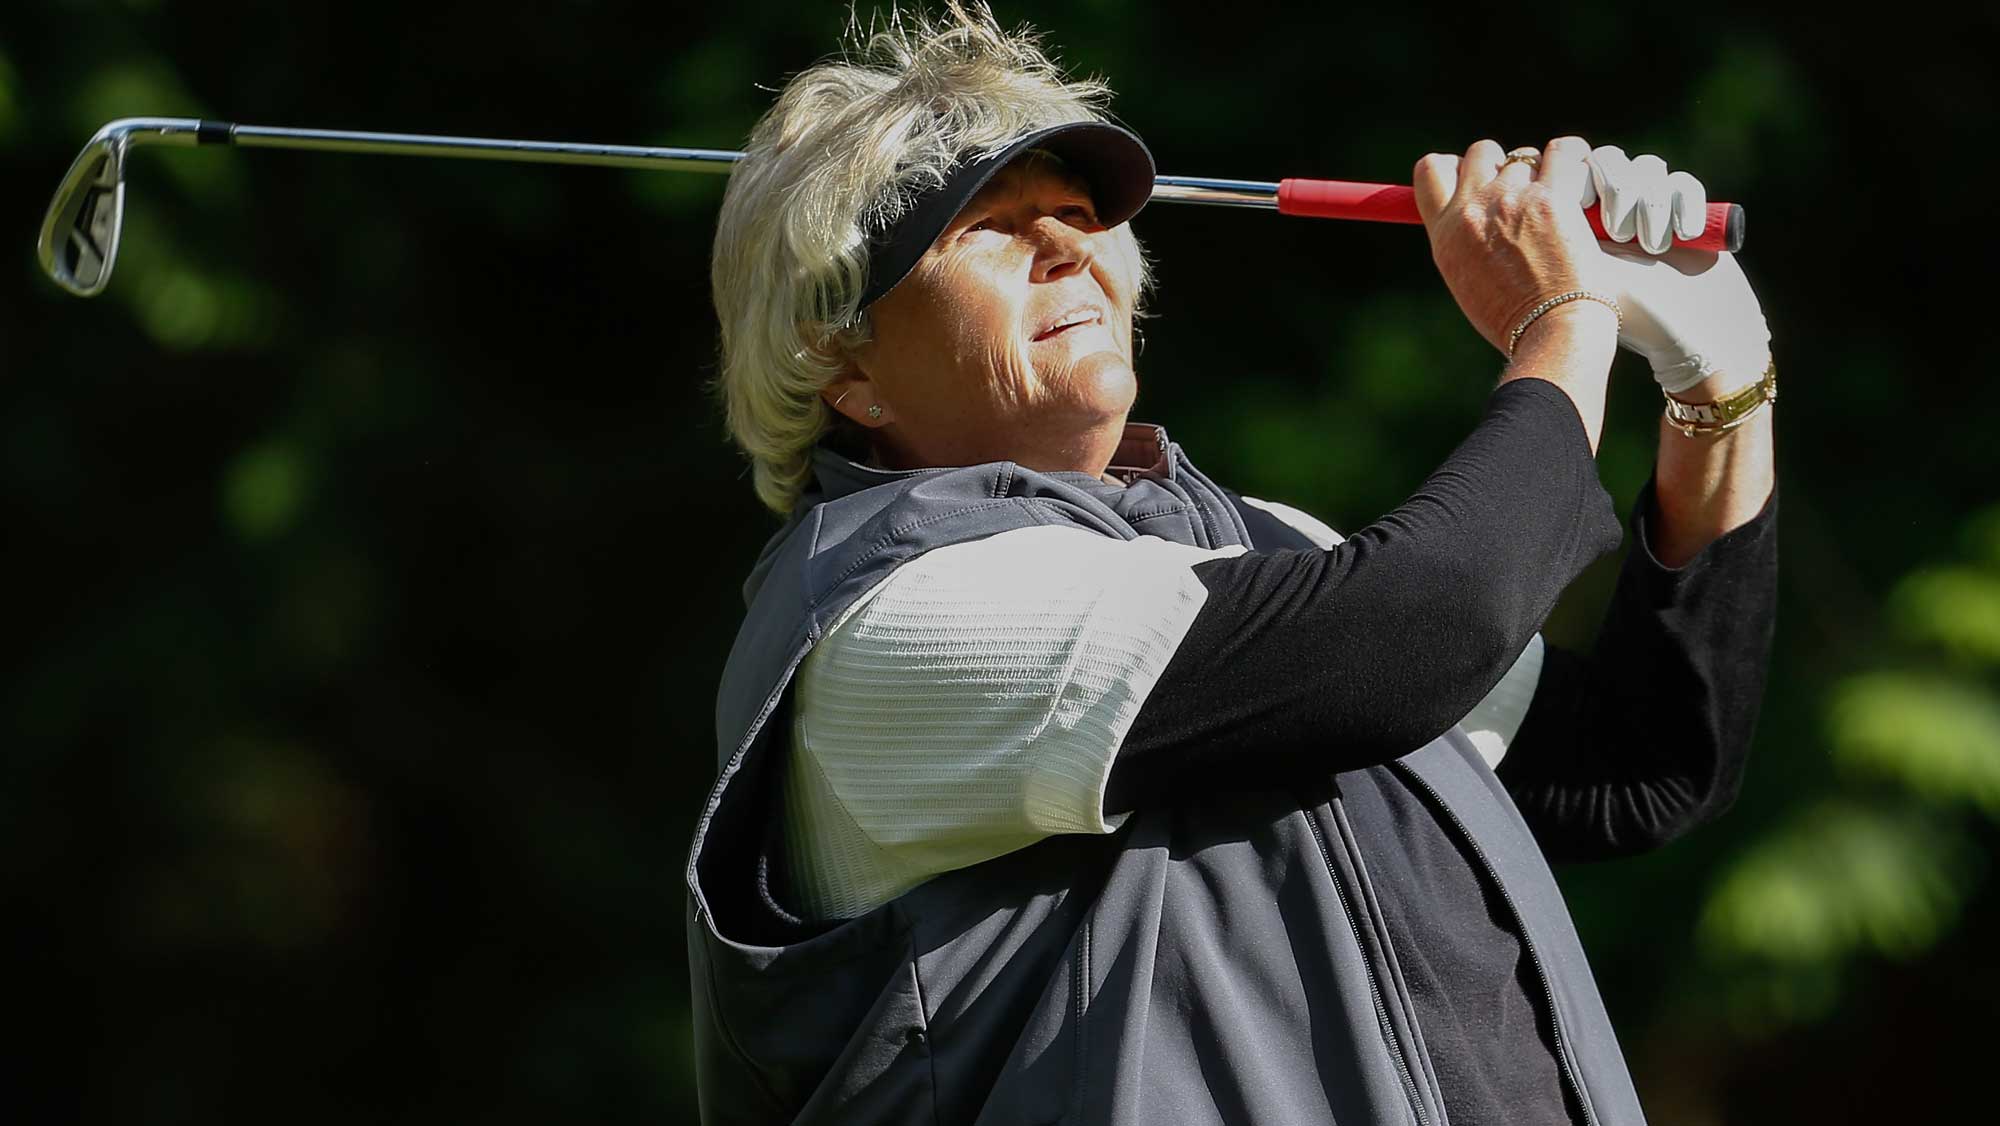 Laura Davies of England hits a tee shot on the 13th tee during the second round of the KPMG Women's PGA Championship